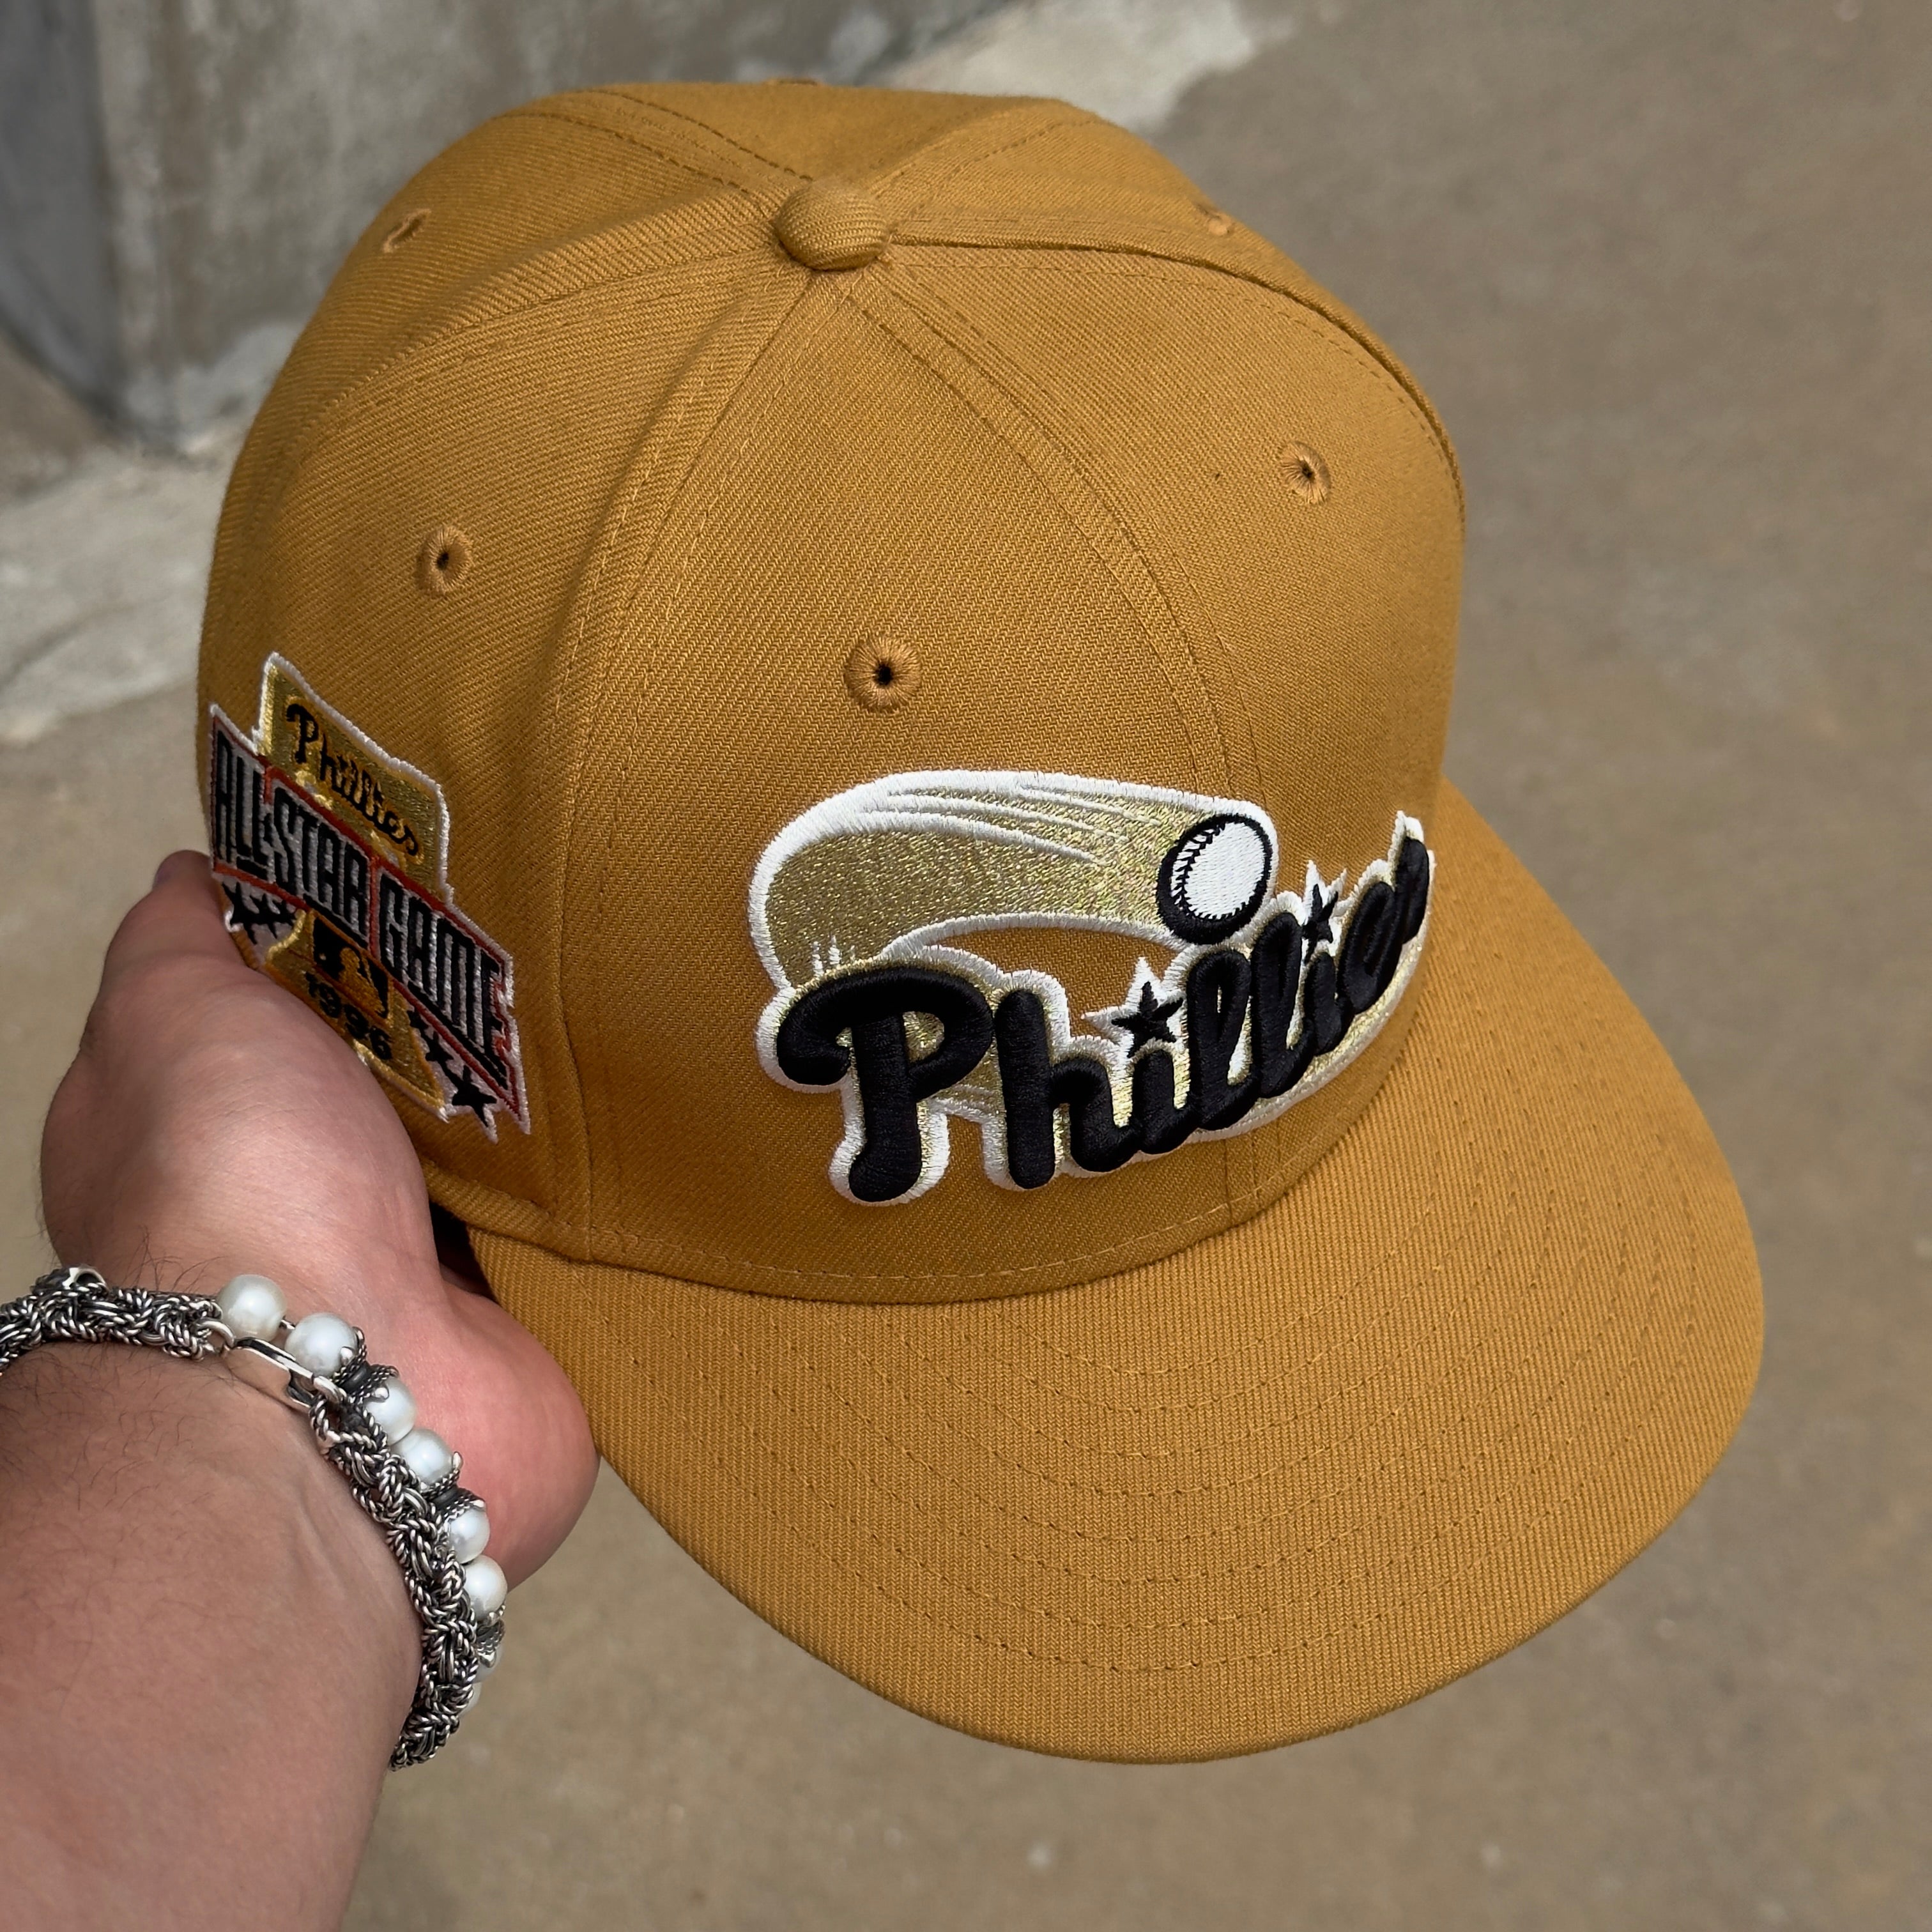 1/2 USED Brown Philadelphia Phillies All Star Game 59fifty New Era Fitted Hat Cap